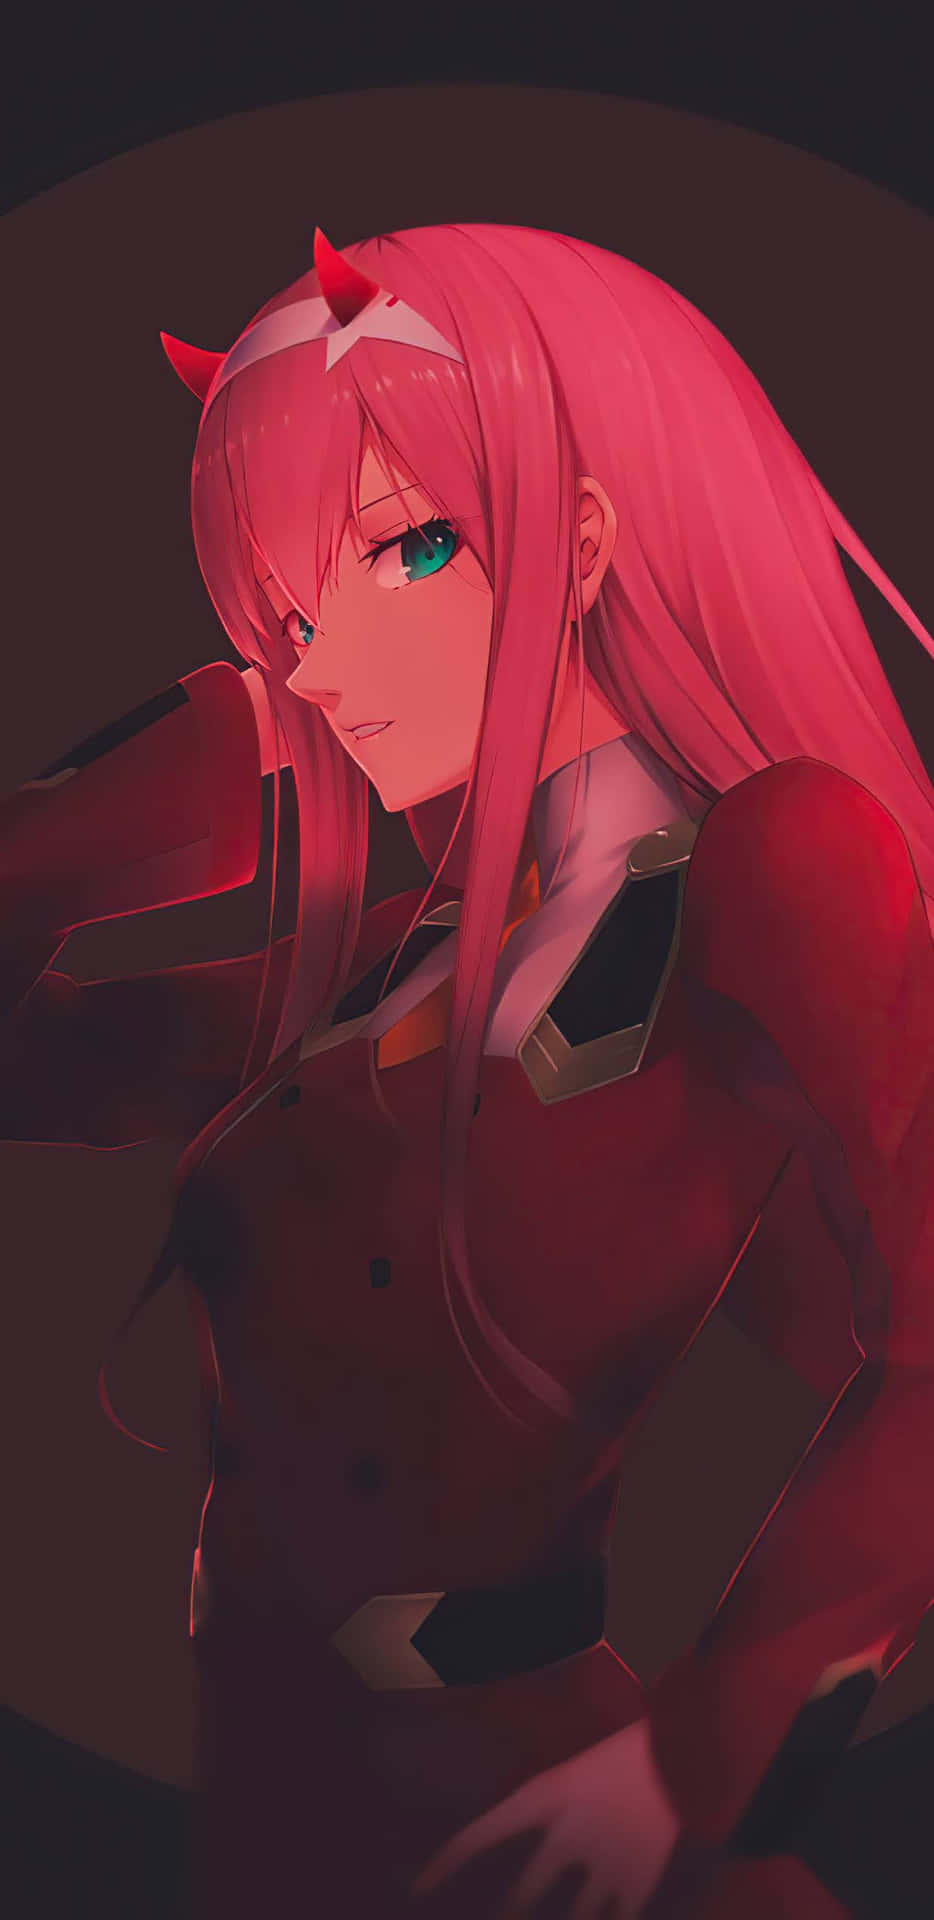 Brighten Up Your Phone With A Darling In The Franxx Theme Wallpaper